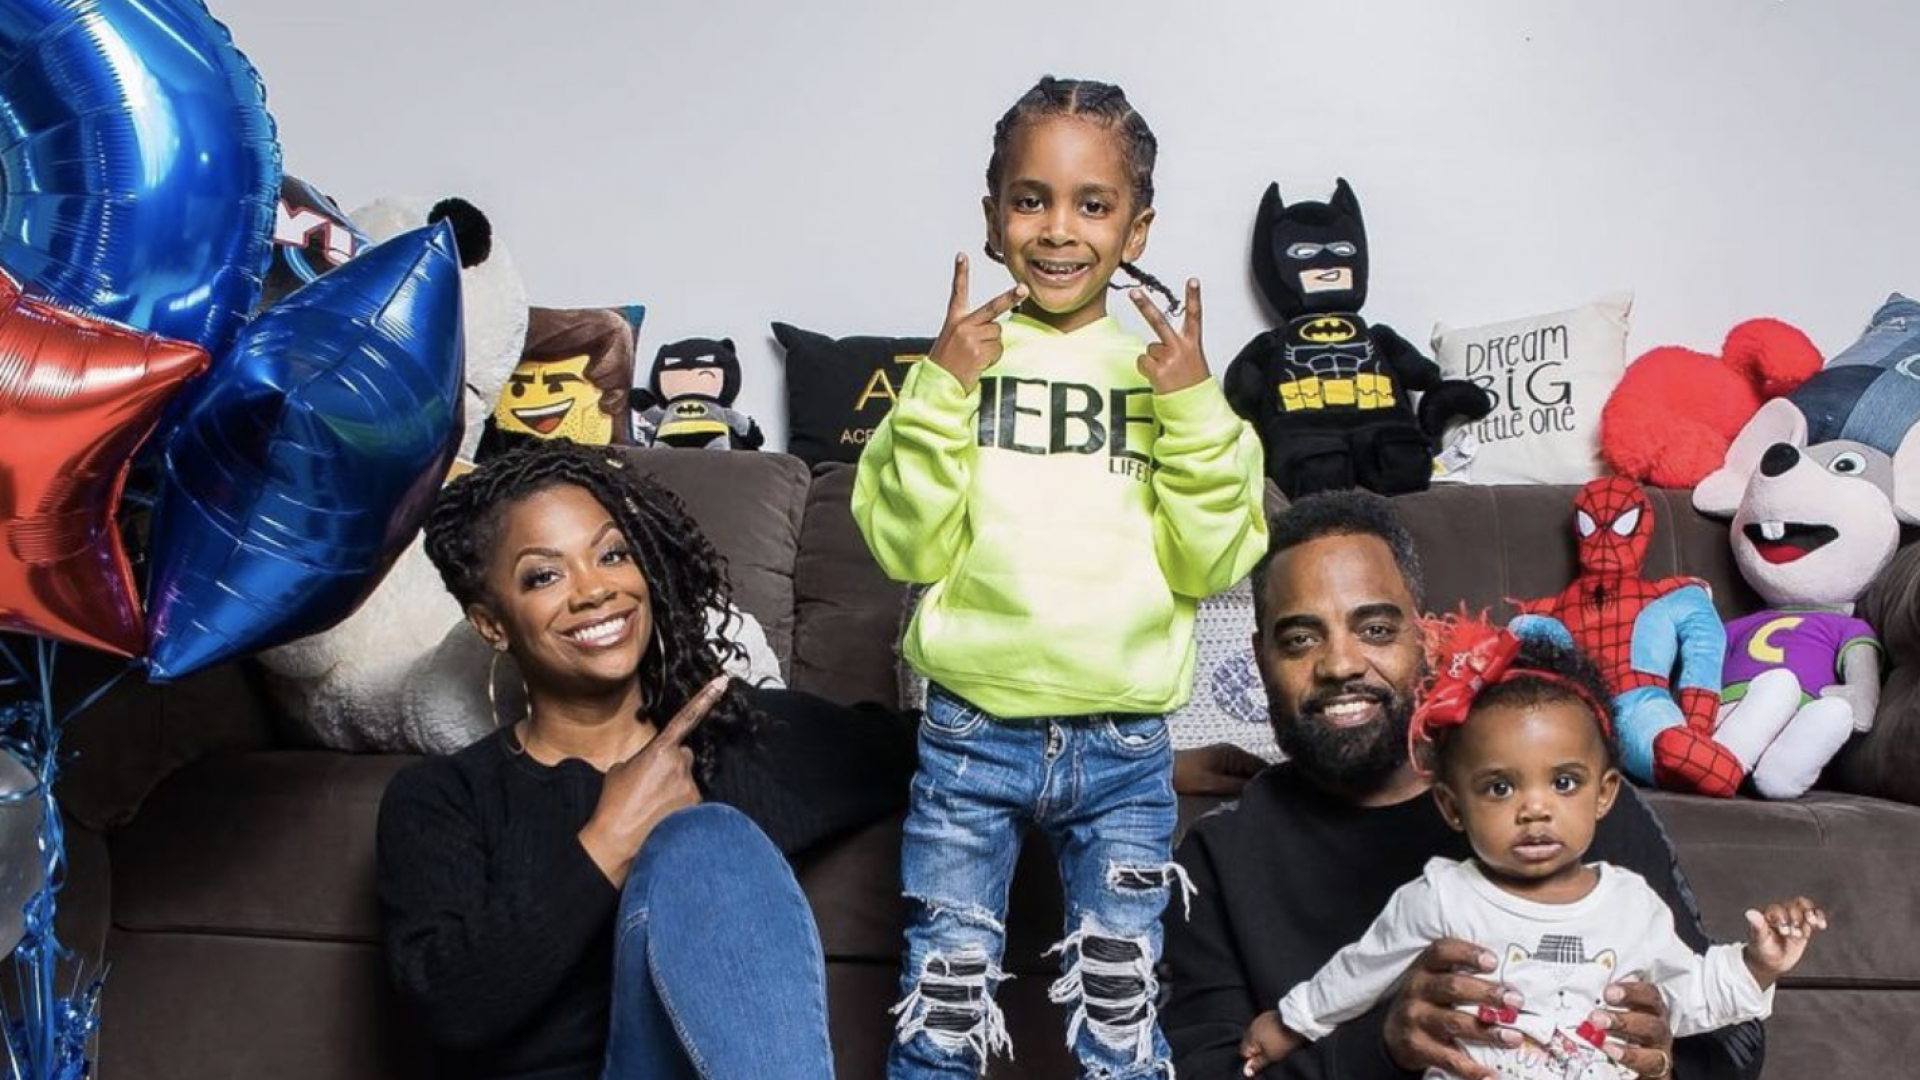 Kandi Burruss And Todd Tucker Went All Out For Their Son's 'Spiderverse' Party